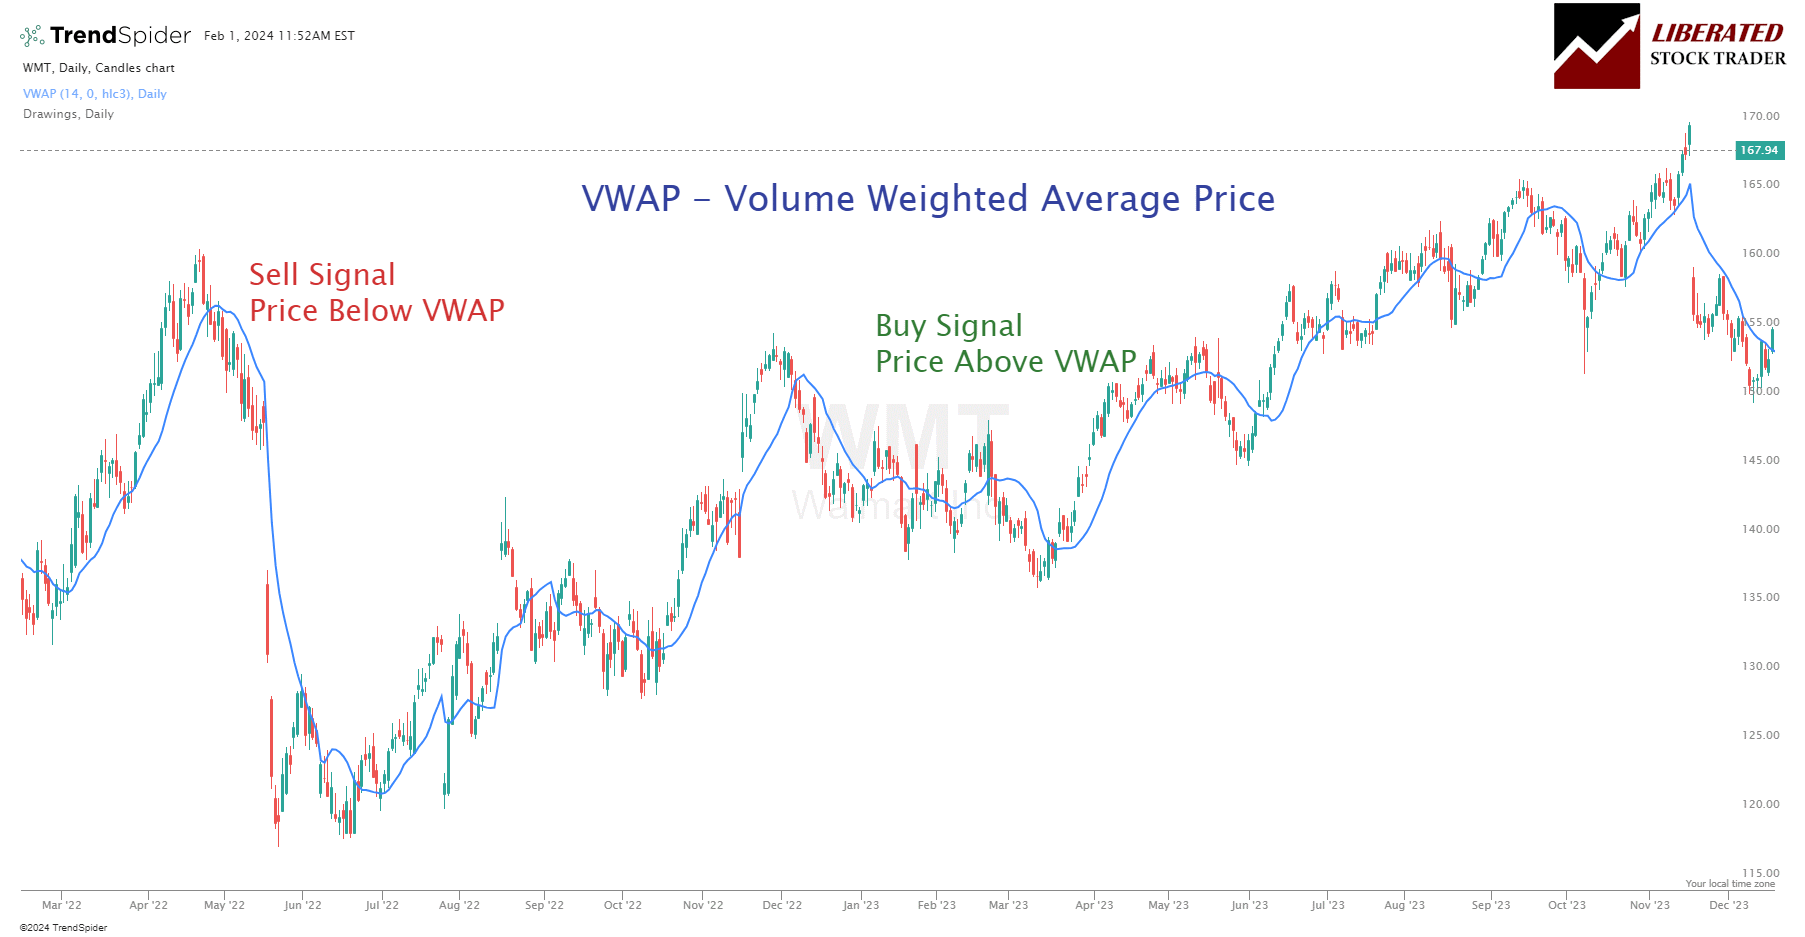 VWAP on a Daily Chart. Price below the VWAP is a bearish signal. Price above is bullish.